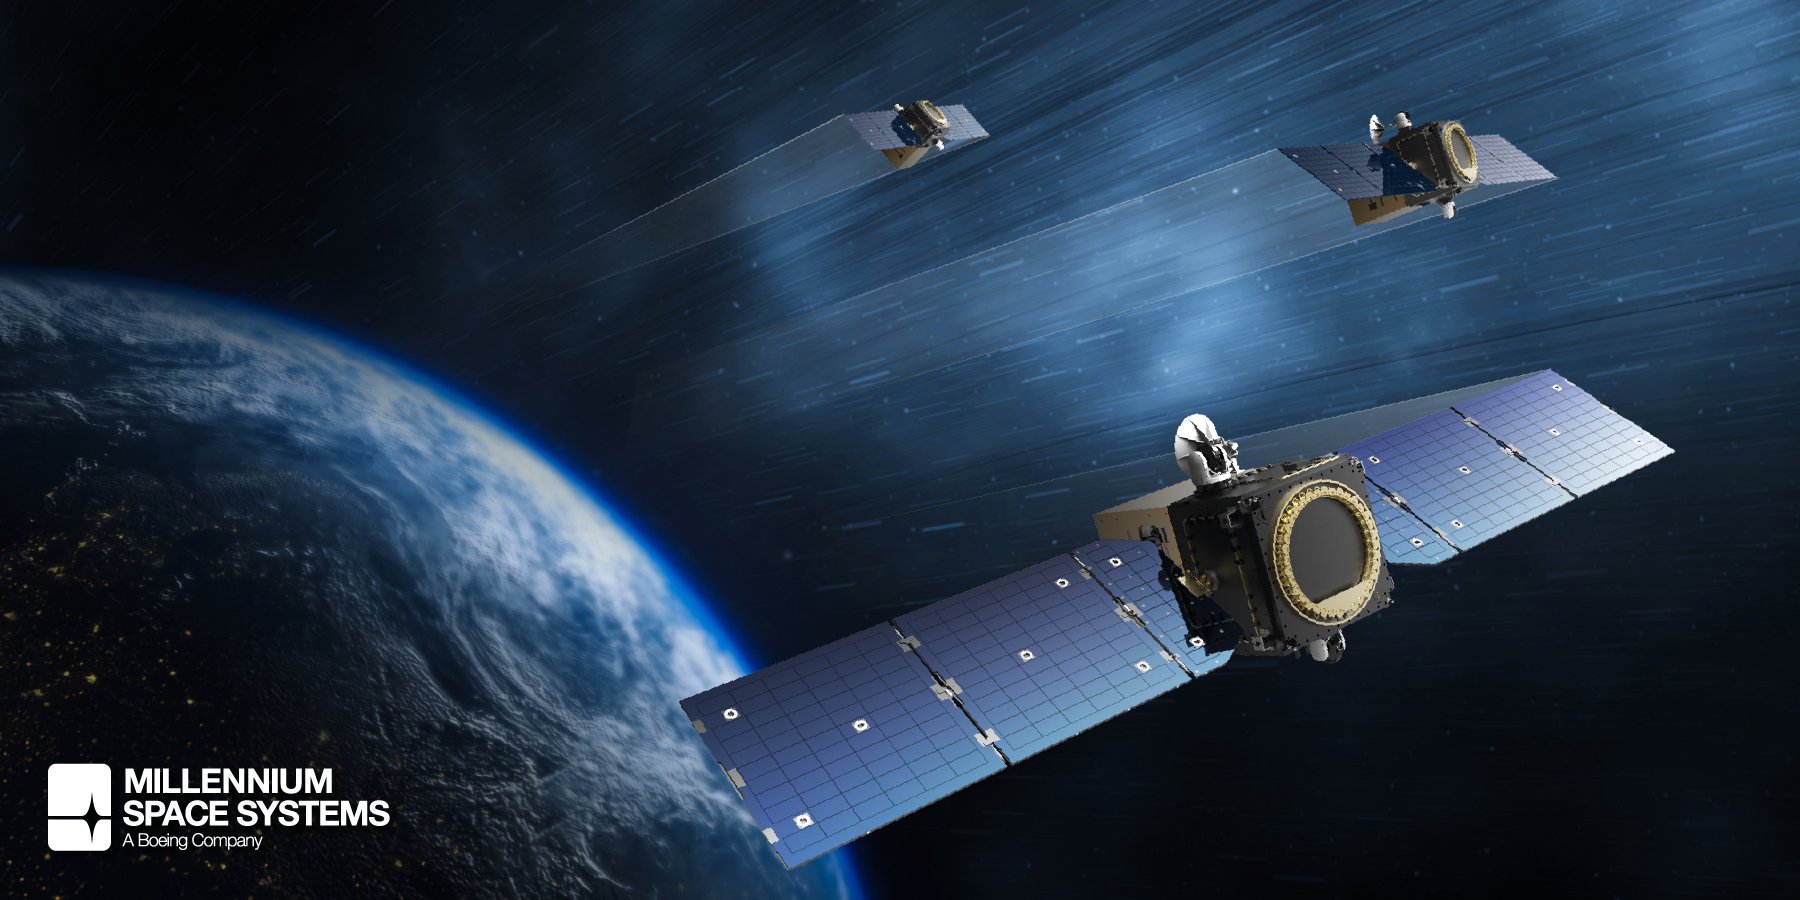 Millennium Space Systems is delivering on critical missile tracking constellation